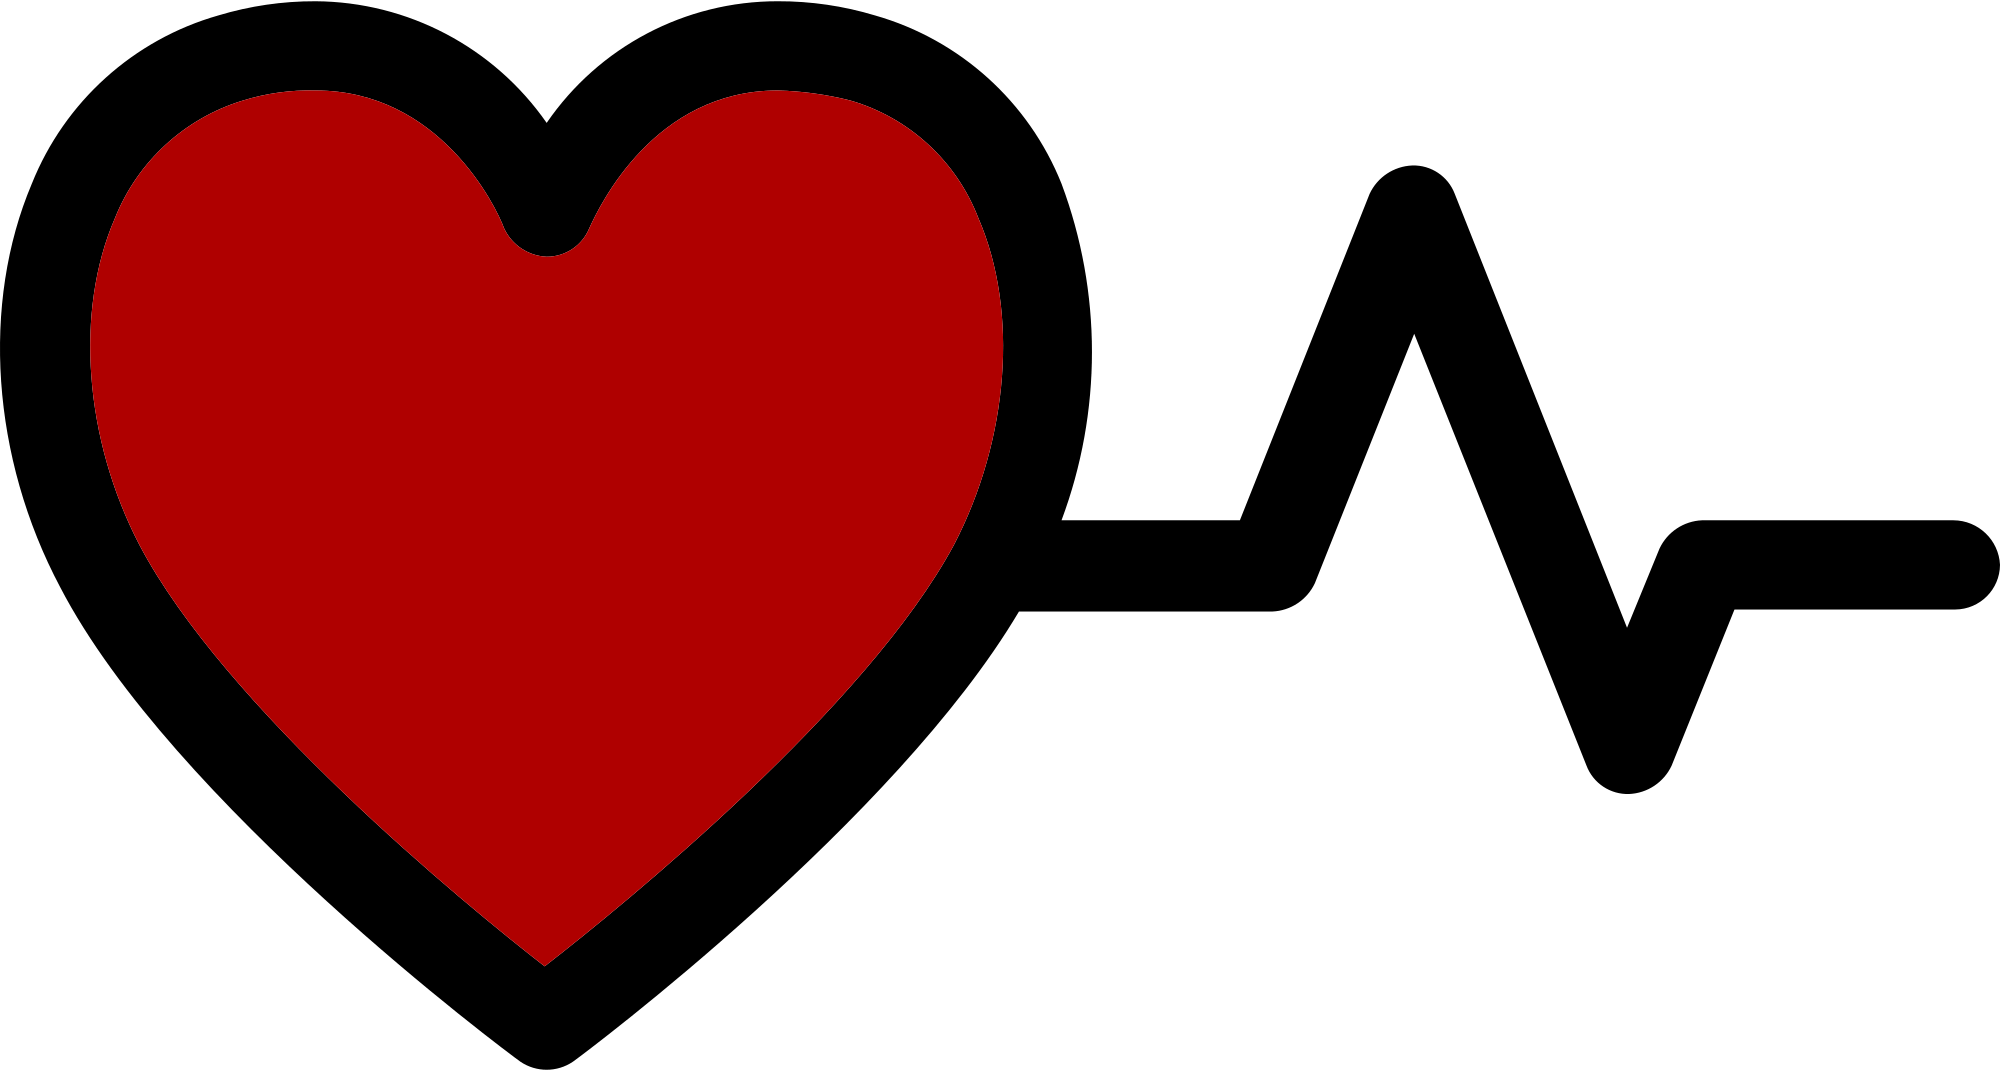 Heart Beat Logo - File:Red heart with heartbeat logo.svg - Wikimedia Commons